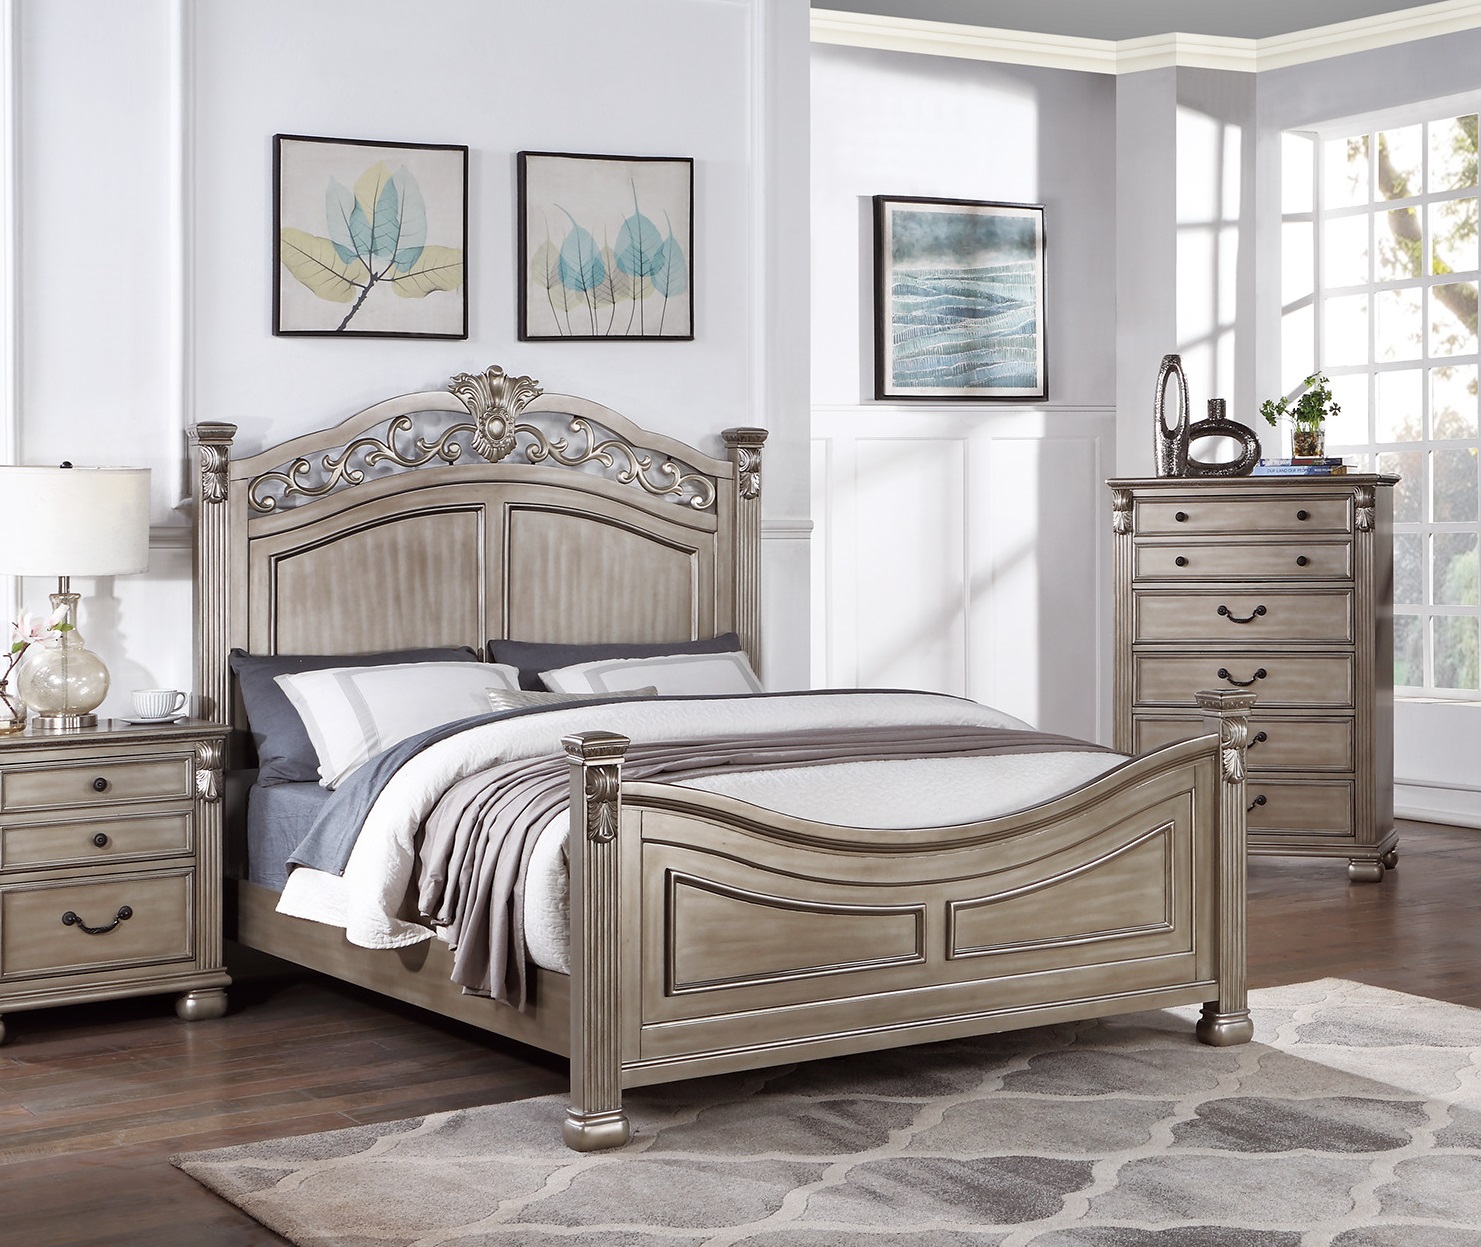 Bed Size King Beds Sears, Sears King Size Bed